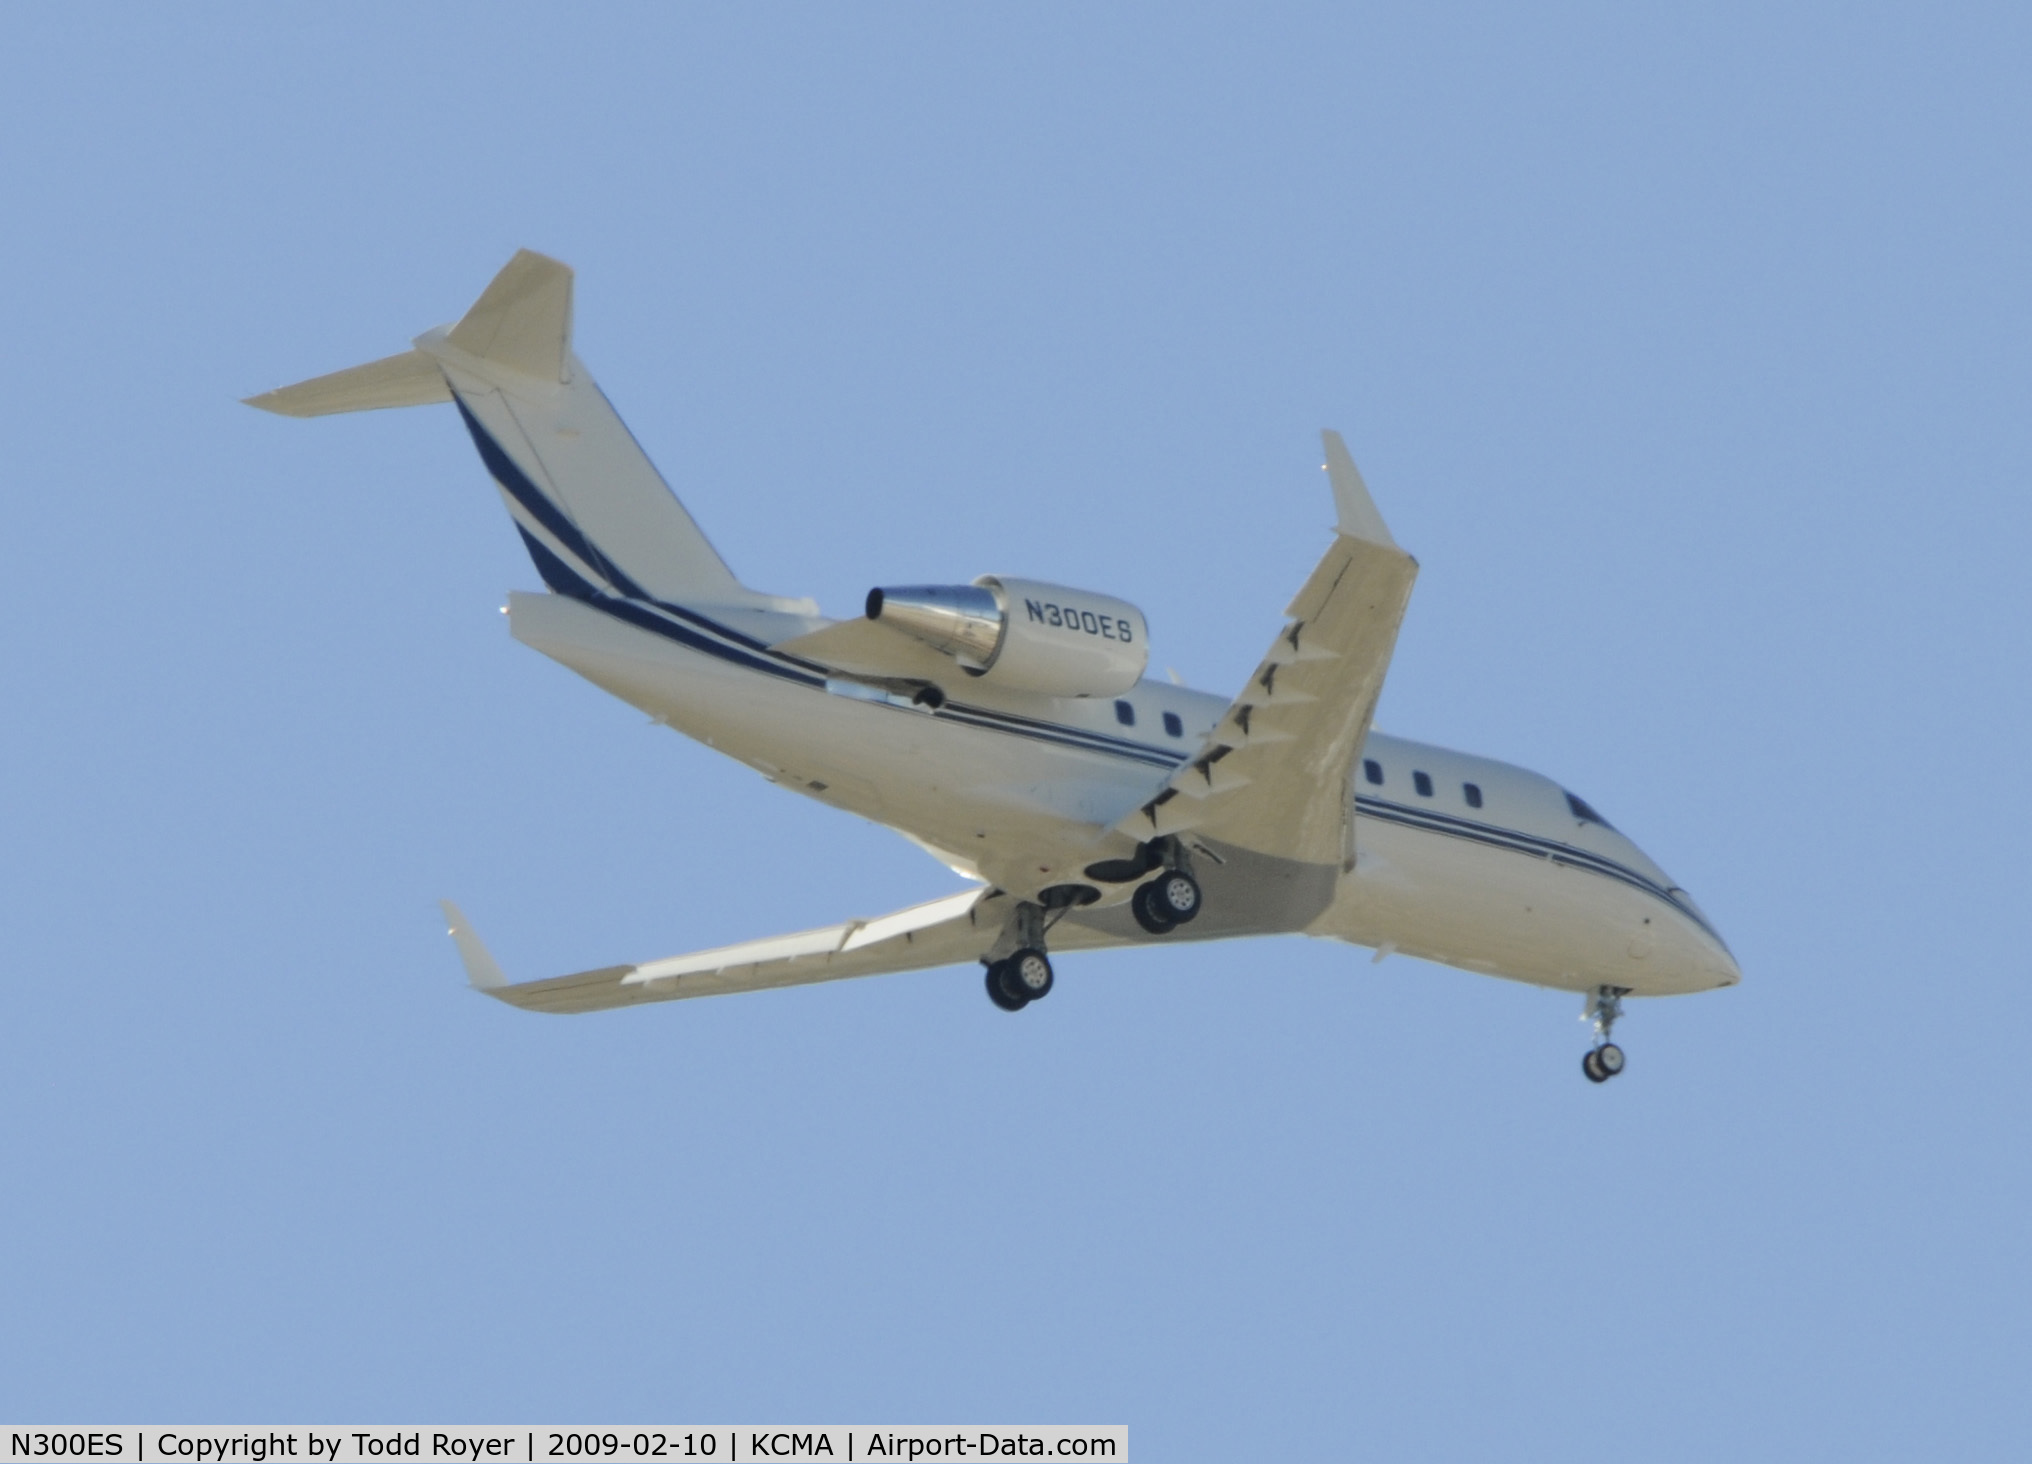 N300ES, 1999 Bombardier Challenger 604 (CL-600-2B16) C/N 5439, From the backyard